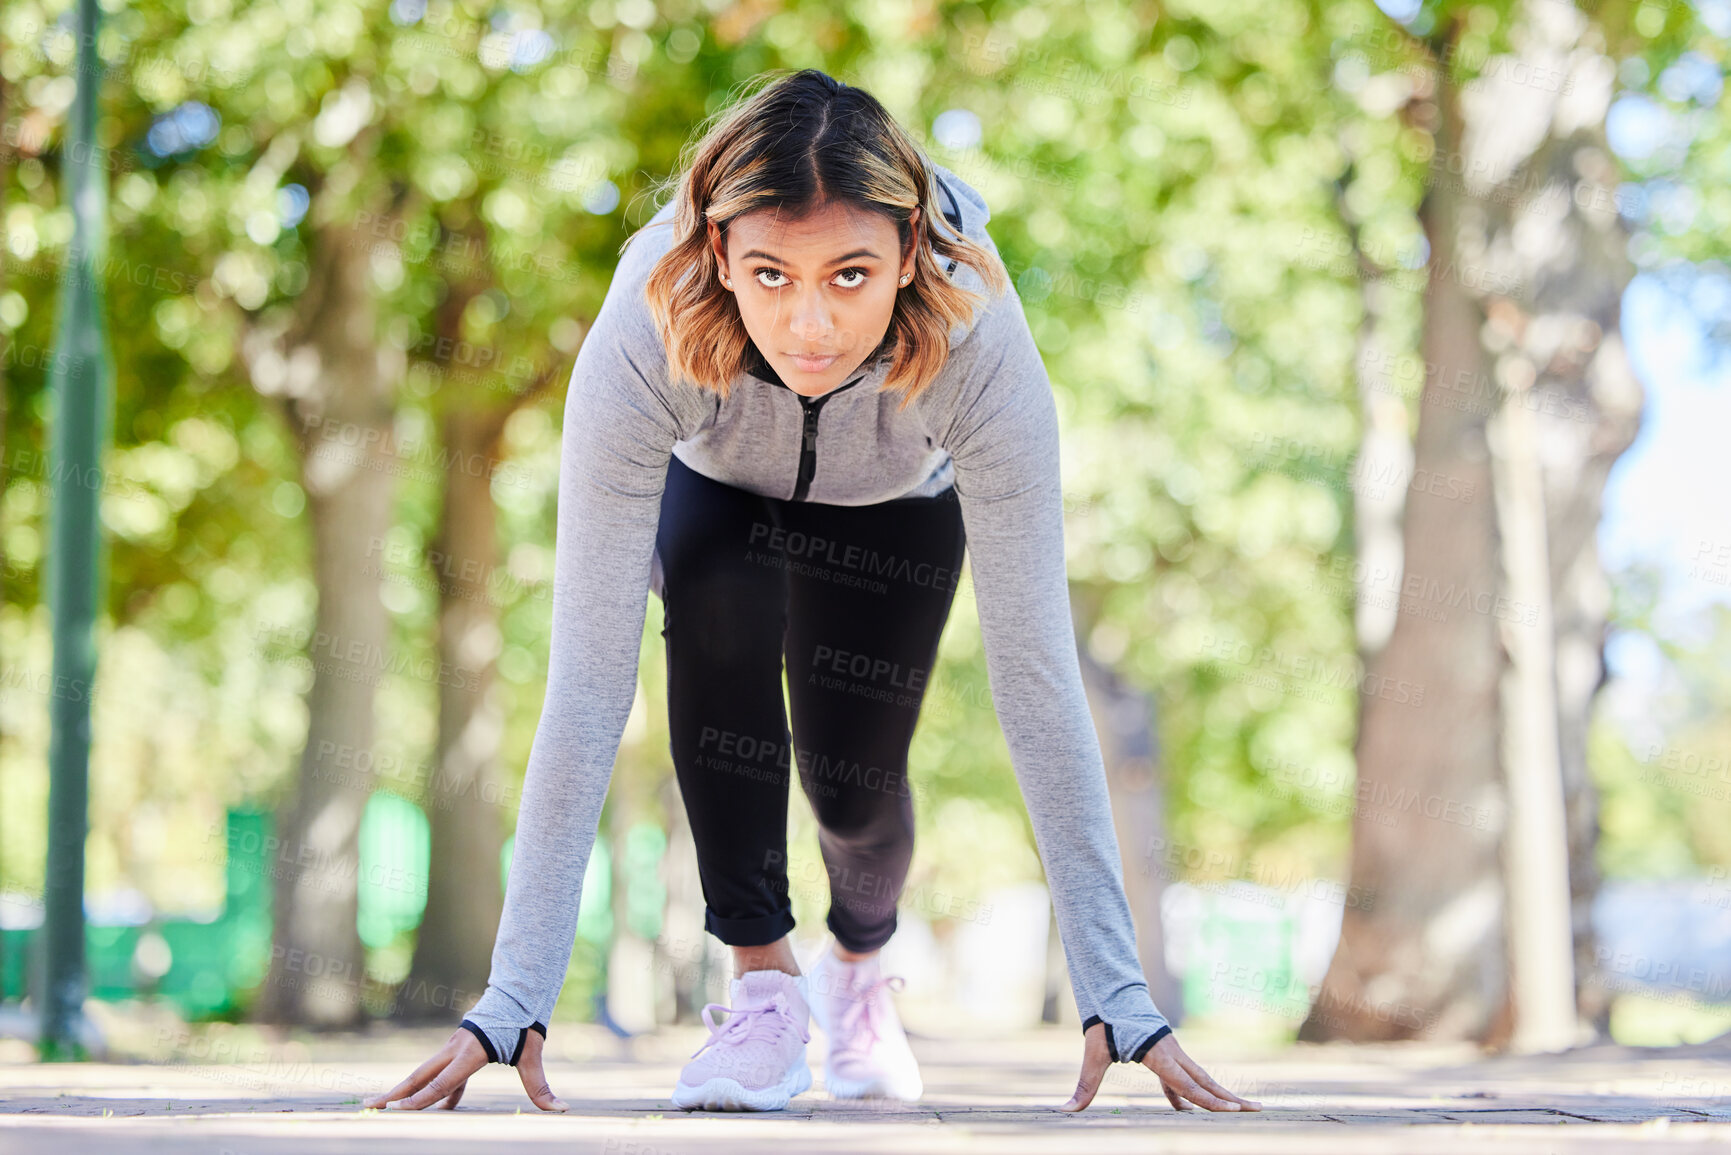 Buy stock photo Run, exercise and a woman in start position outdoor at a park with commitment and focus on wellness. Young female person on a road in nature ready for workout, running or training for marathon